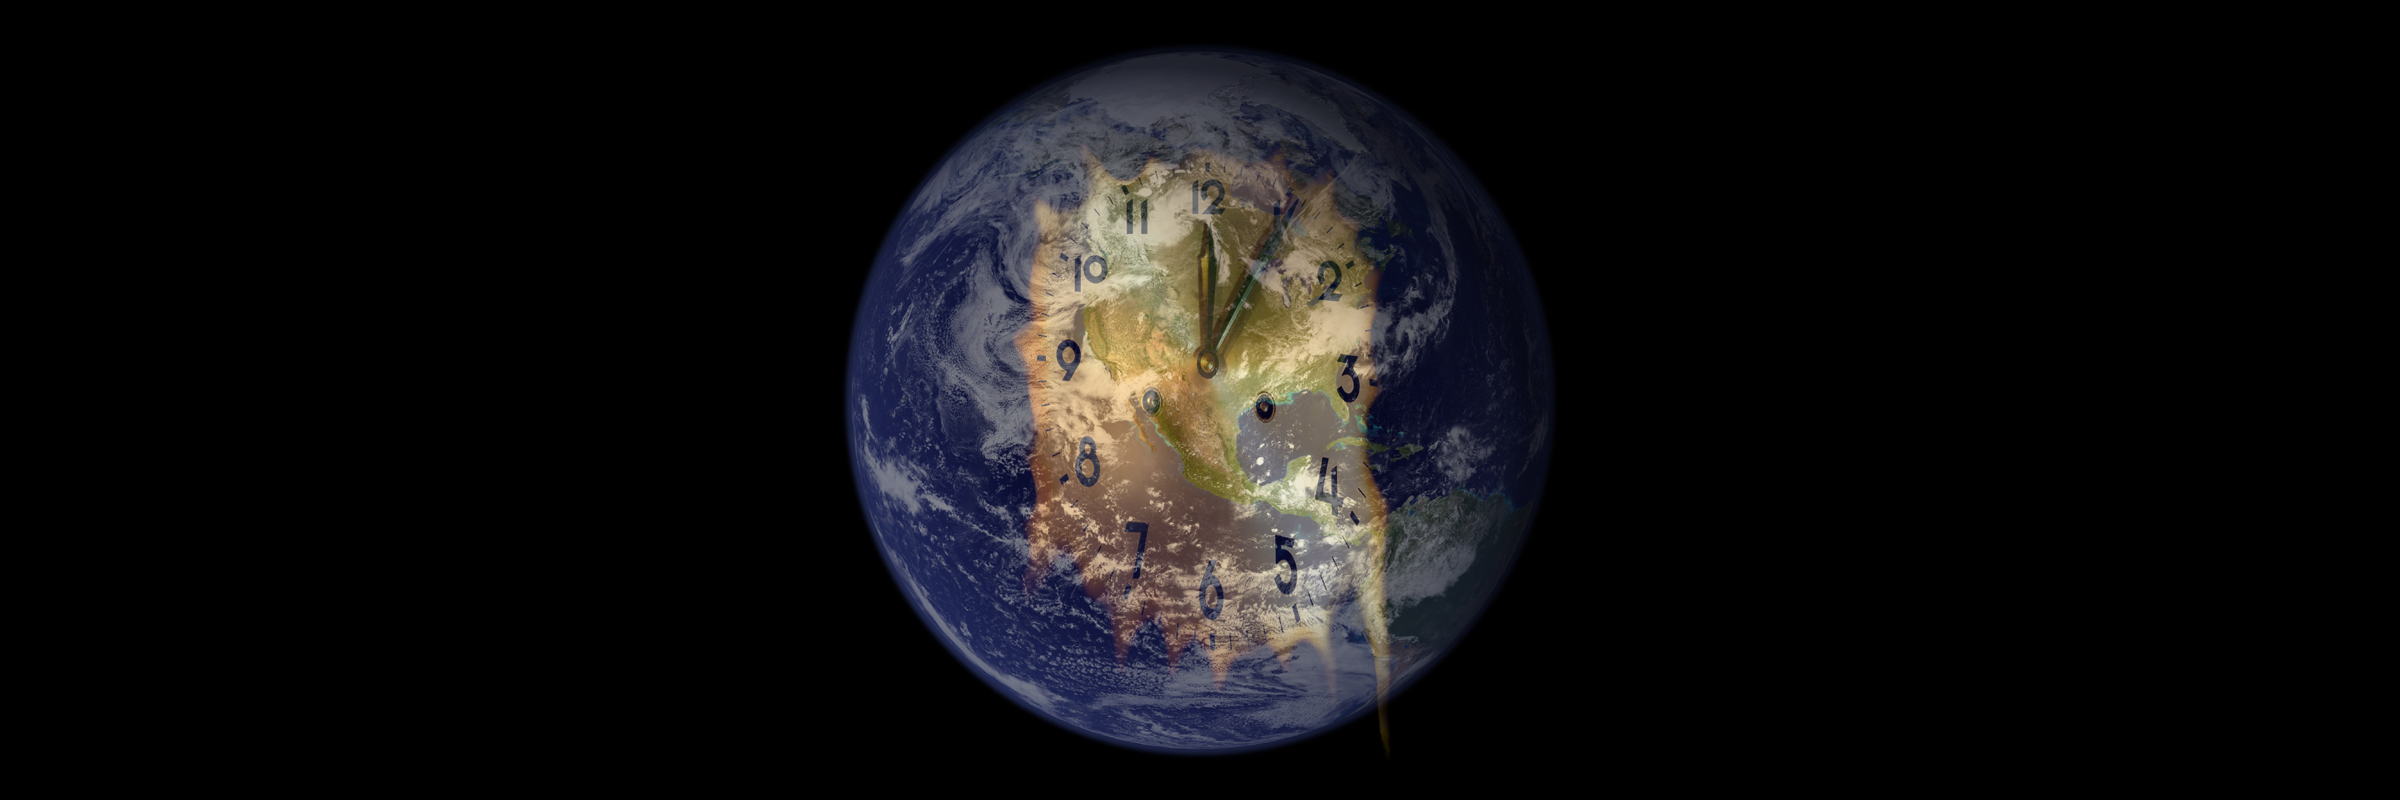 Earth Climate Clock Past Midnight